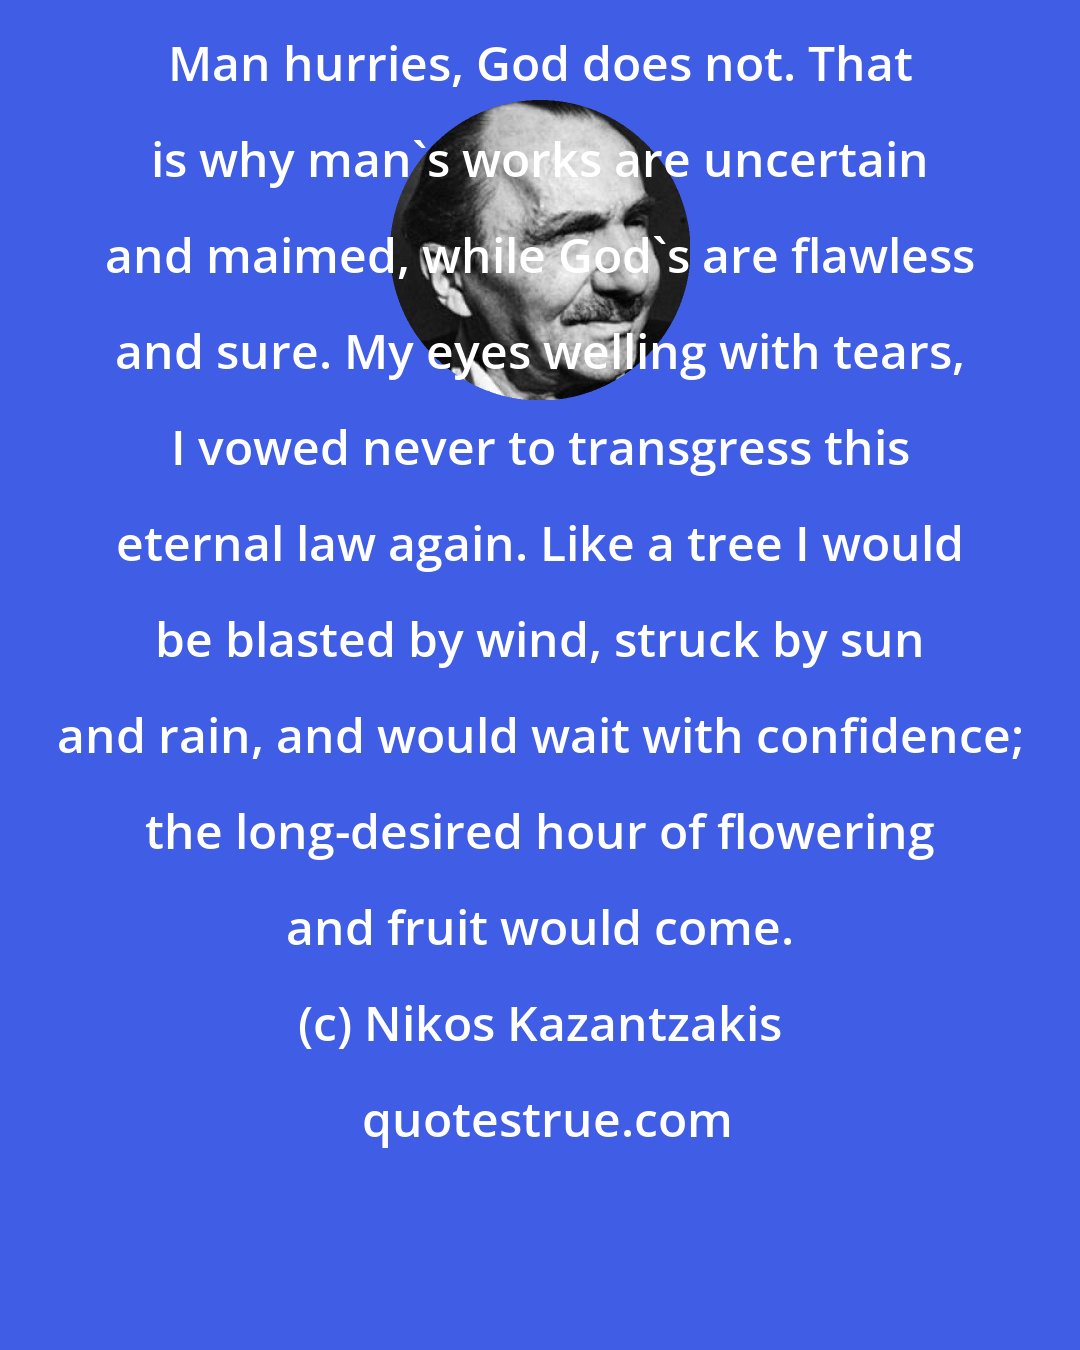 Nikos Kazantzakis: Man hurries, God does not. That is why man's works are uncertain and maimed, while God's are flawless and sure. My eyes welling with tears, I vowed never to transgress this eternal law again. Like a tree I would be blasted by wind, struck by sun and rain, and would wait with confidence; the long-desired hour of flowering and fruit would come.